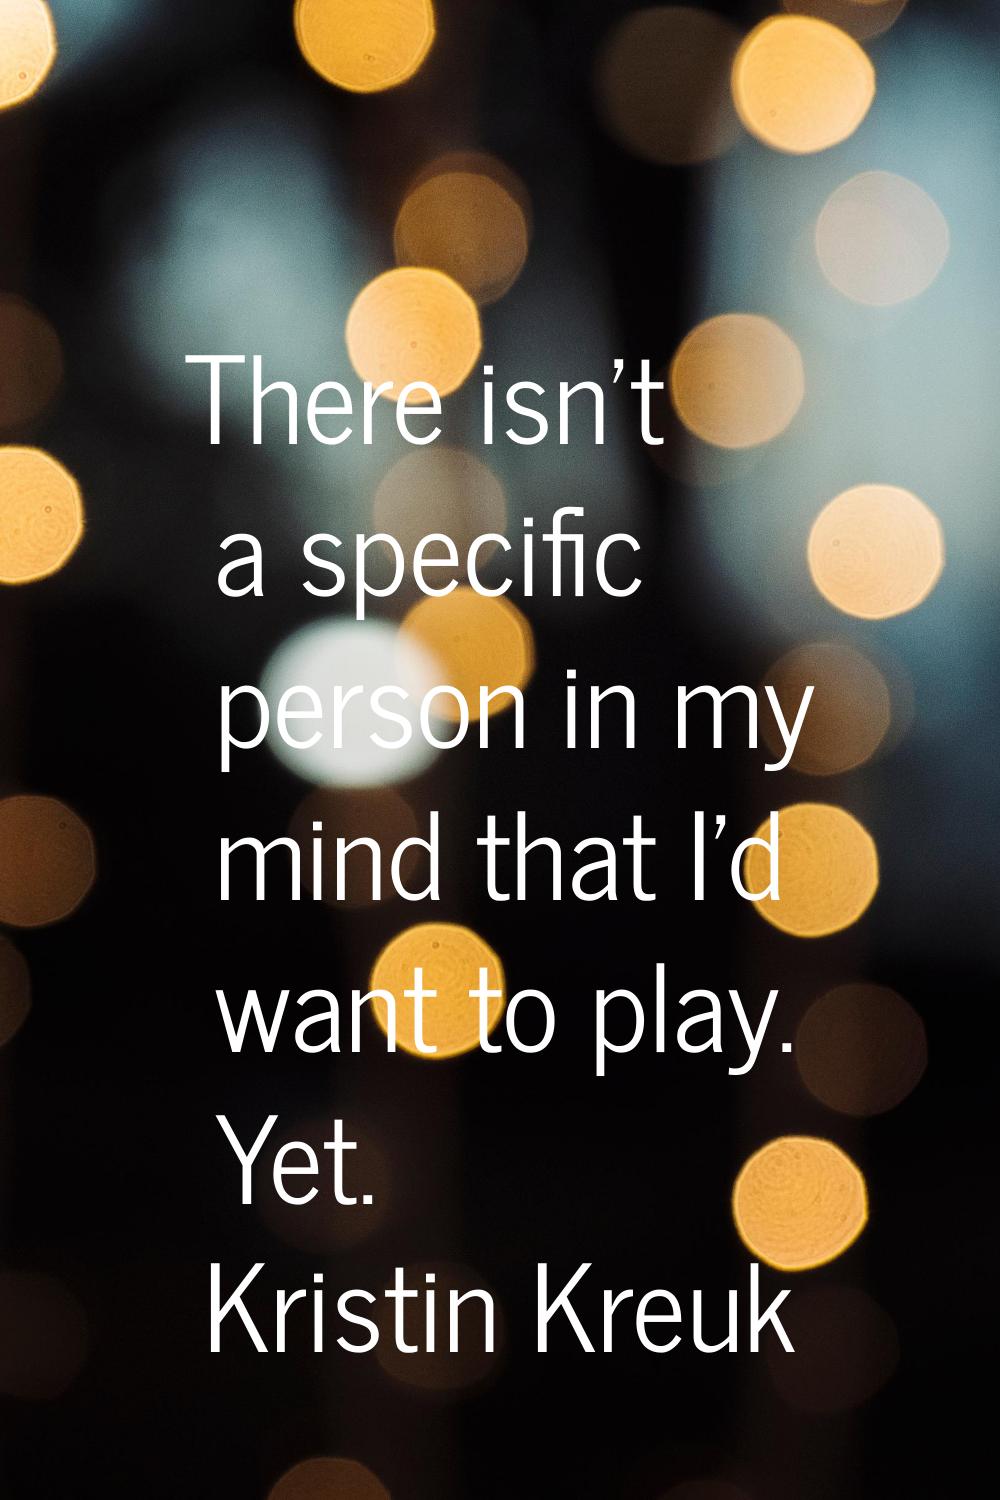 There isn't a specific person in my mind that I'd want to play. Yet.